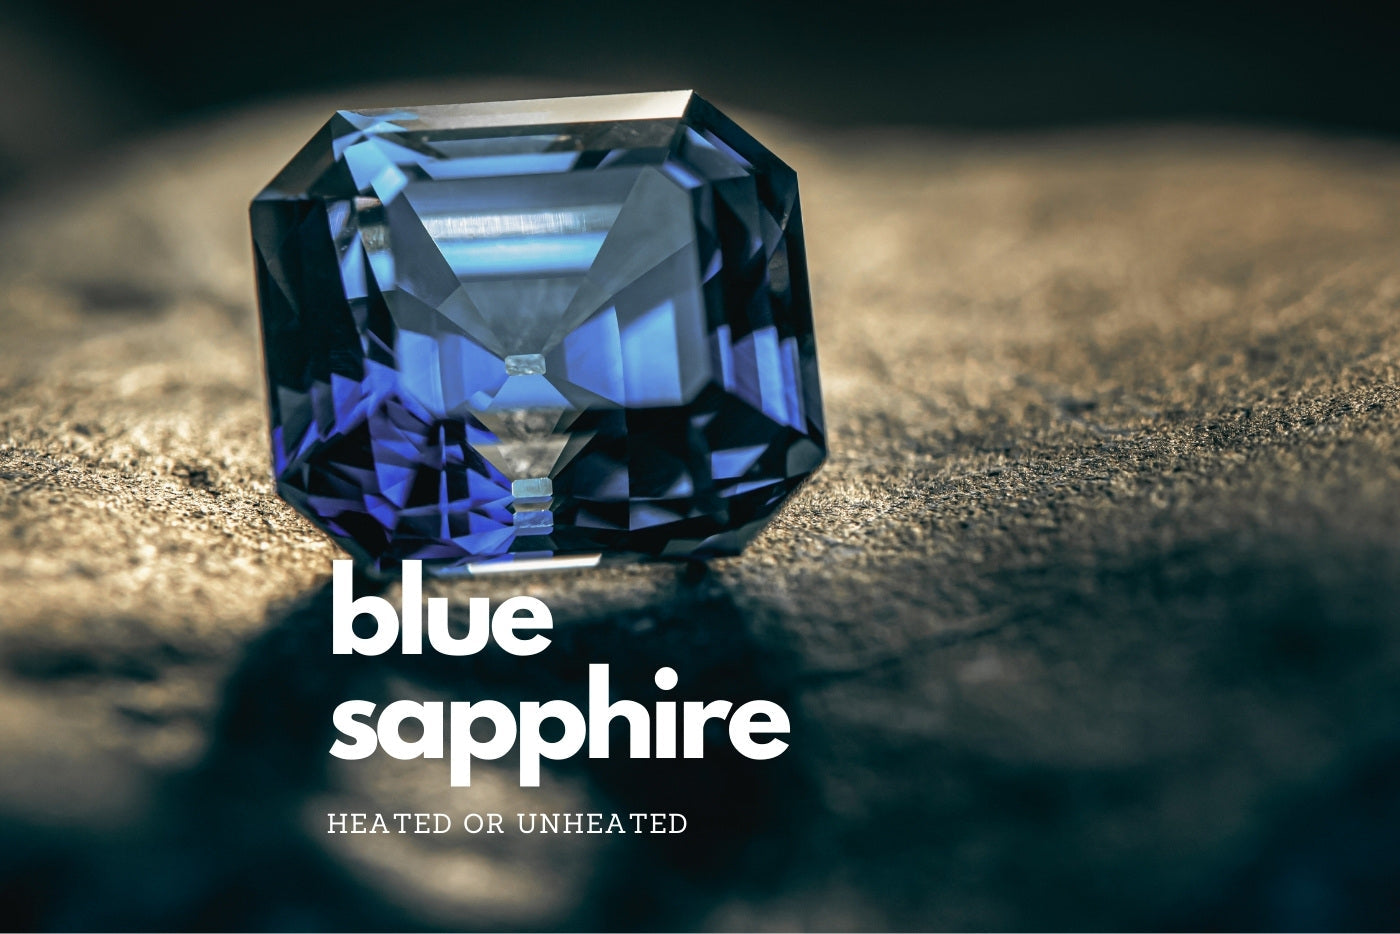 Blue sapphires from Thailand are among the sought after gemstone in the world